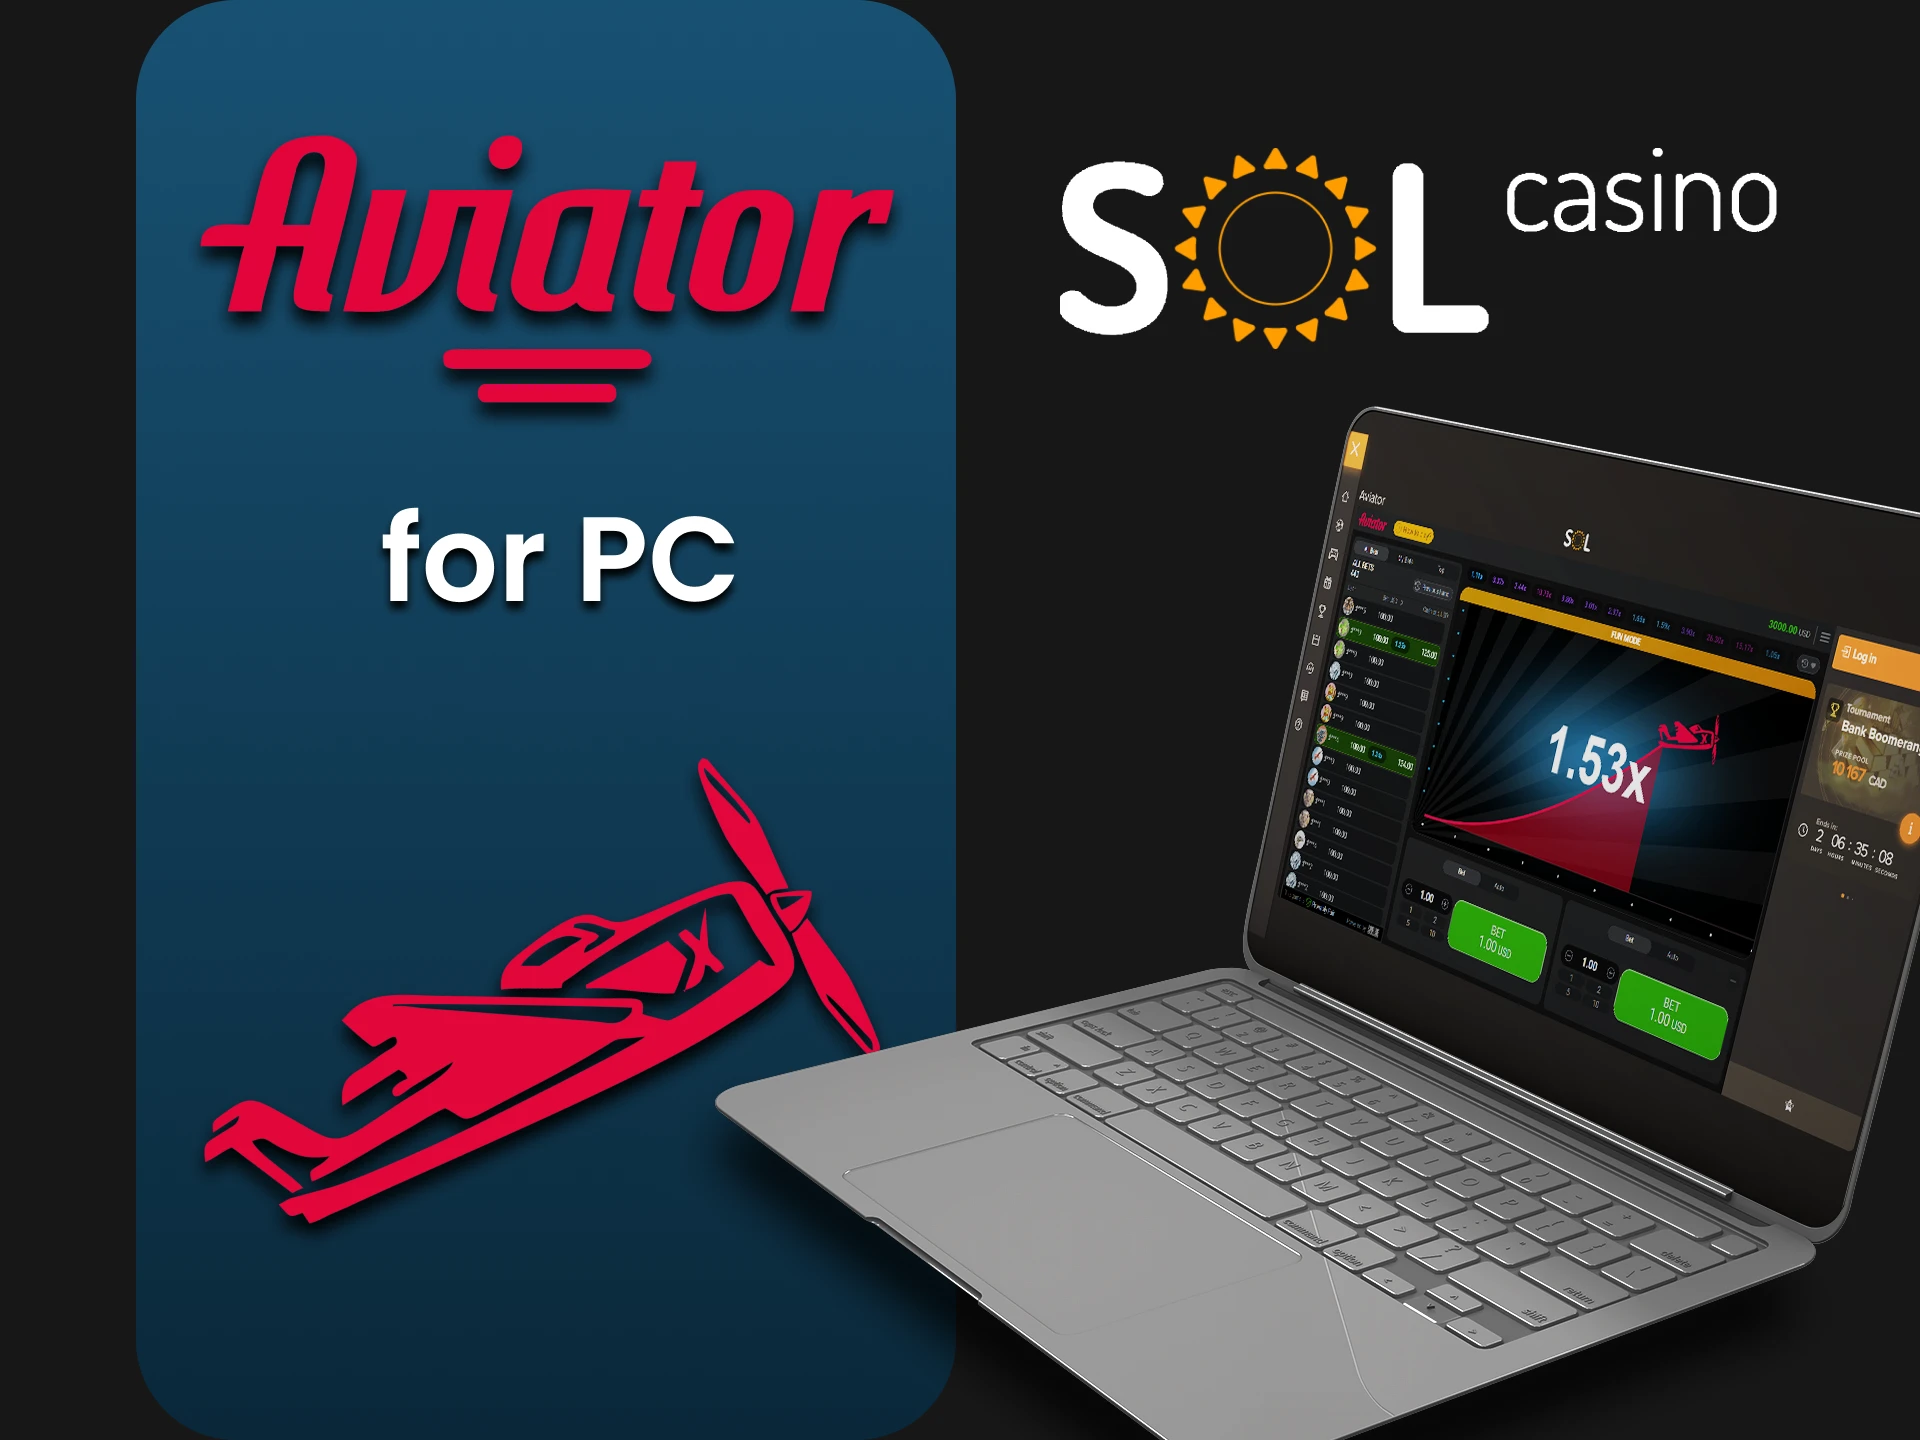 You can play Aviator via PC on the Sol Casino website.